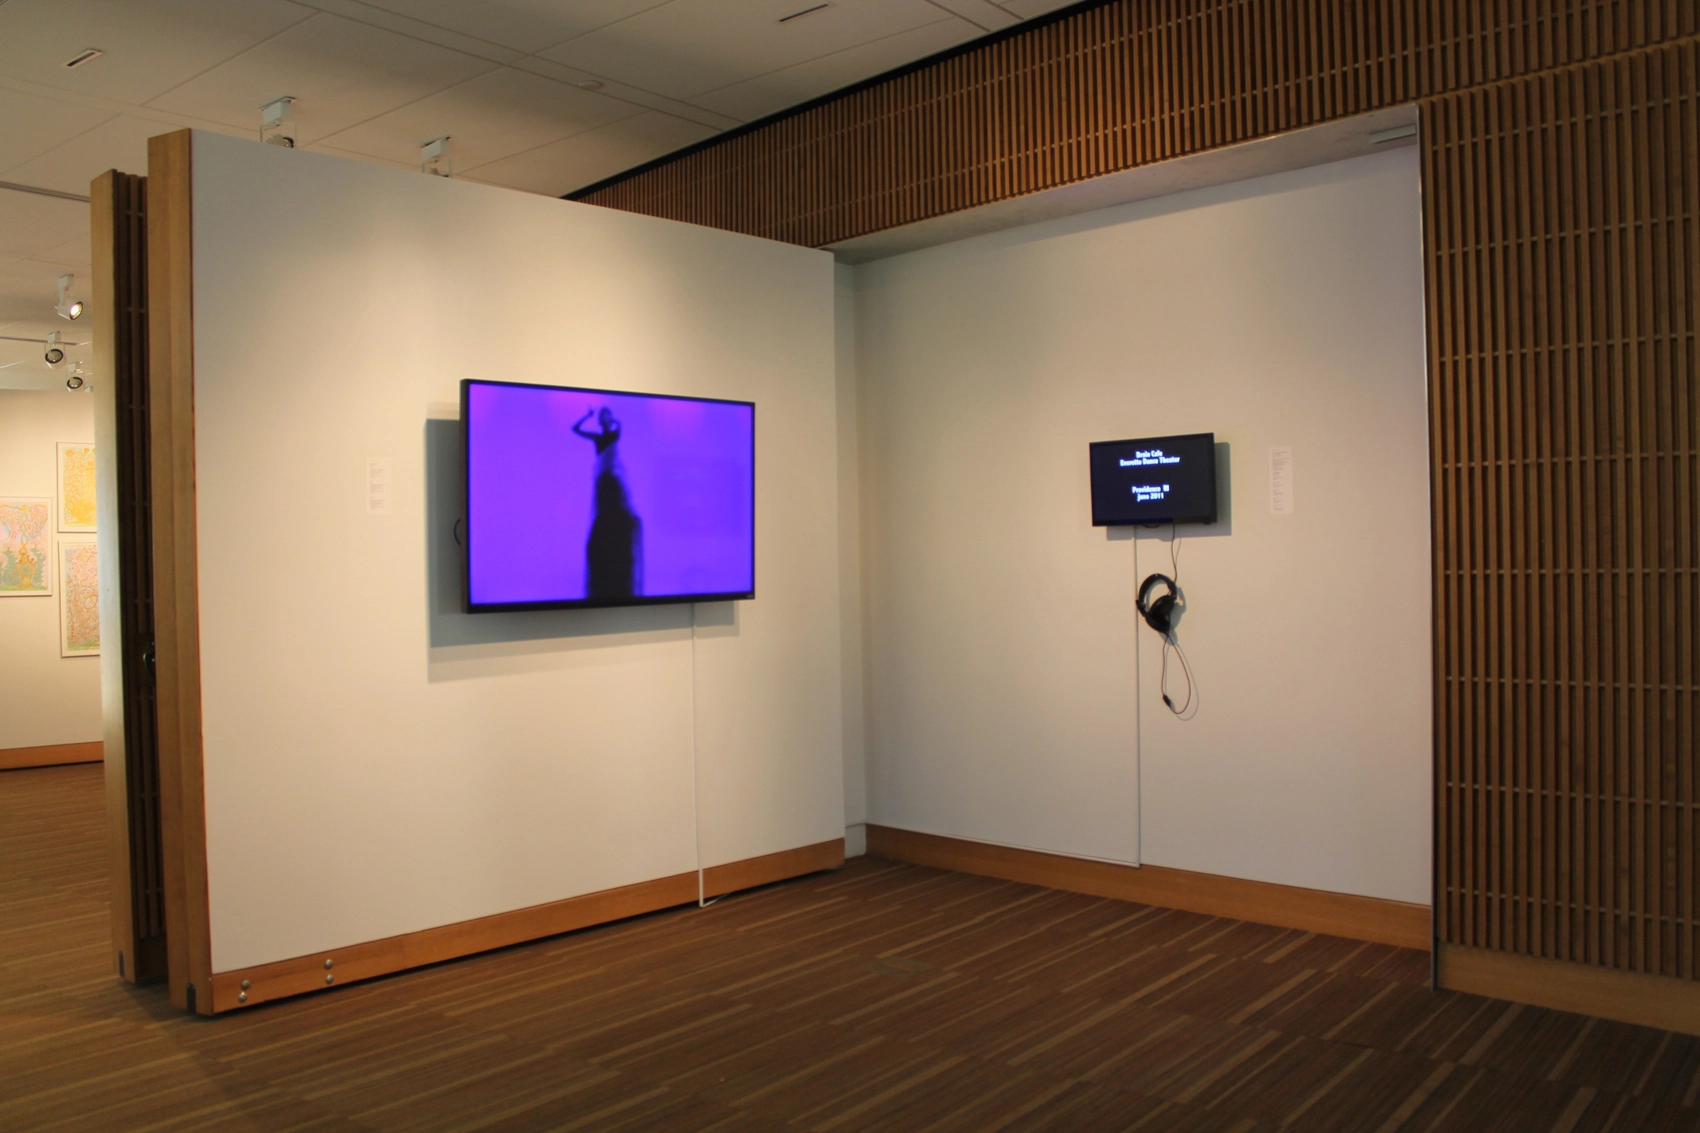 Installation view, "Band of Artists: Spectrum Order Disorder," 2014, Commons Art Gallery